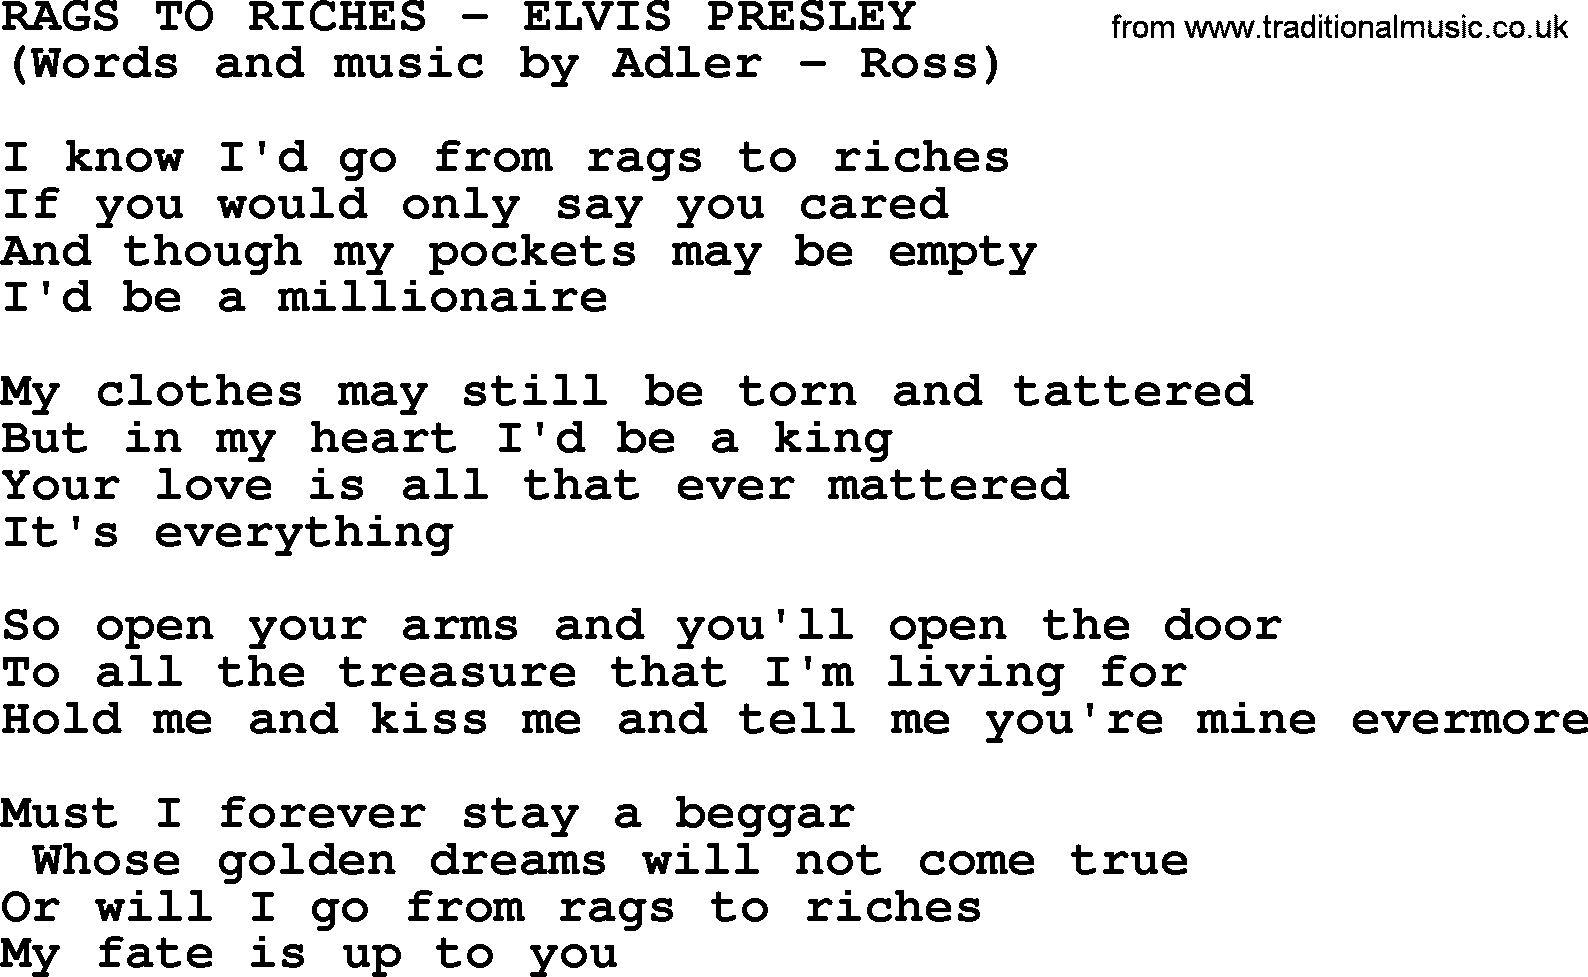 Elvis Presley song: Rags To Riches lyrics